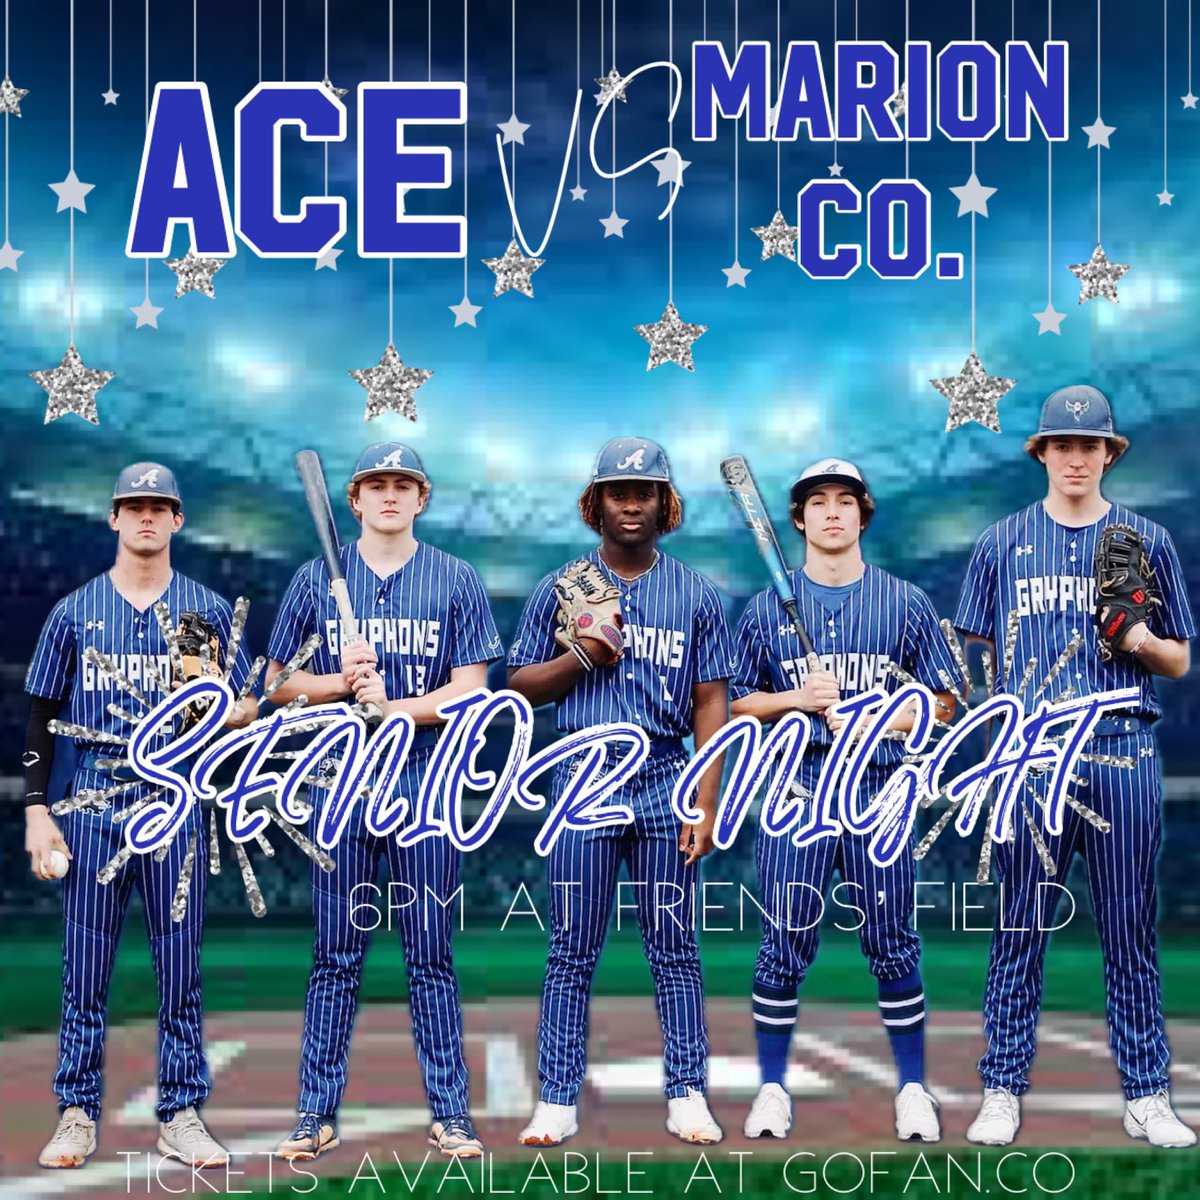 IT’S GAME DAY!!! 
⚾️ Varsity baseball hosts Marion Co tonight! It’s senior night! First pitch at 6:00PM! 

#gogryphons #ACEathletics #weareACE